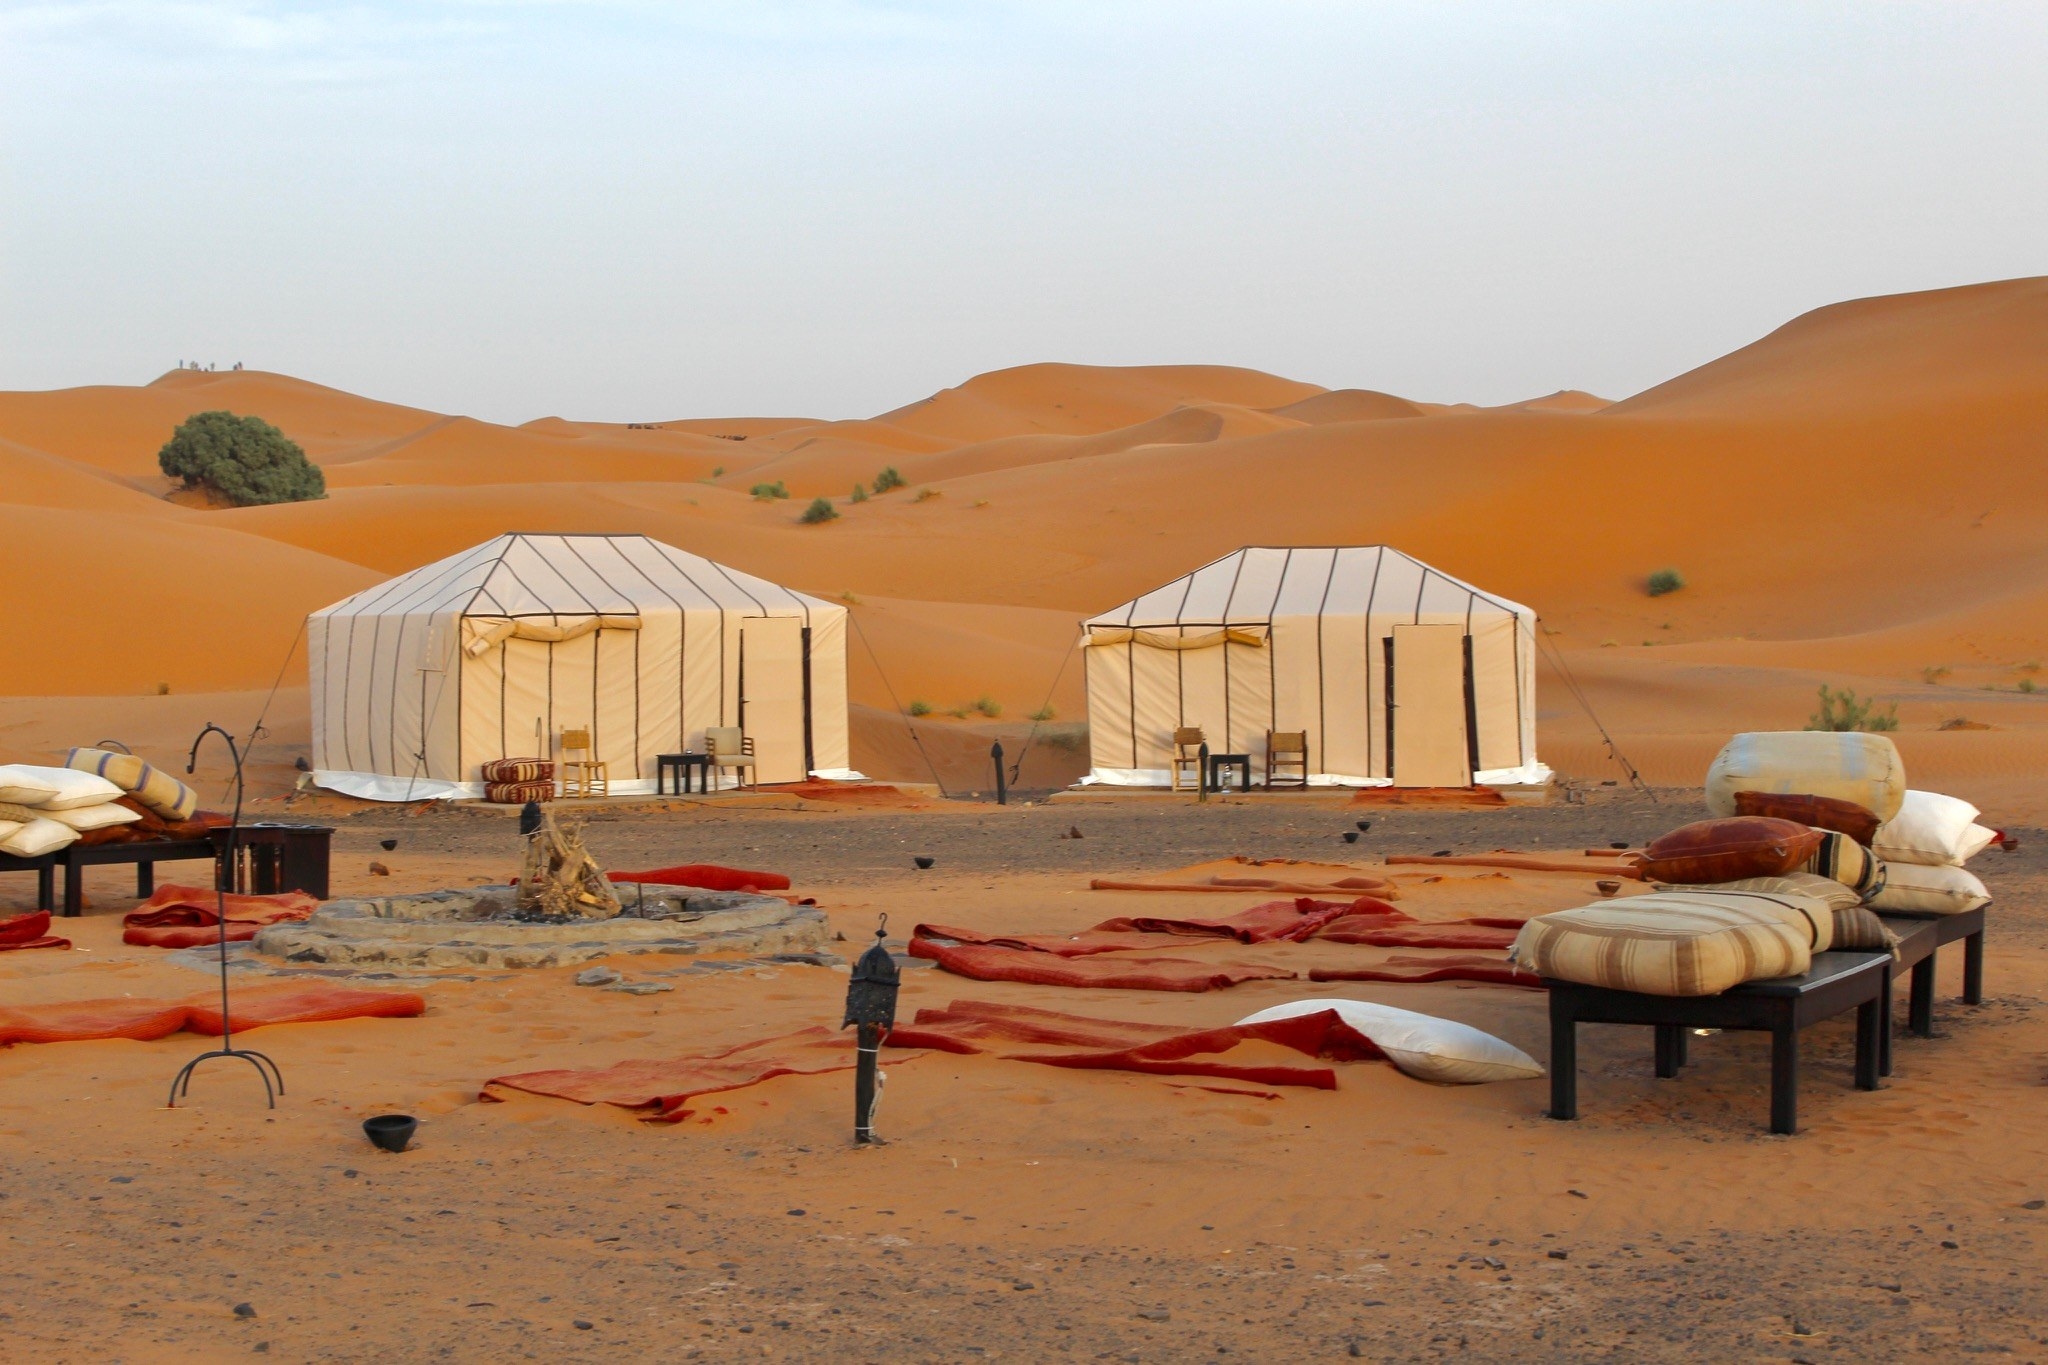 A campsite and tents surrounded by dunes in the Sahara Desert